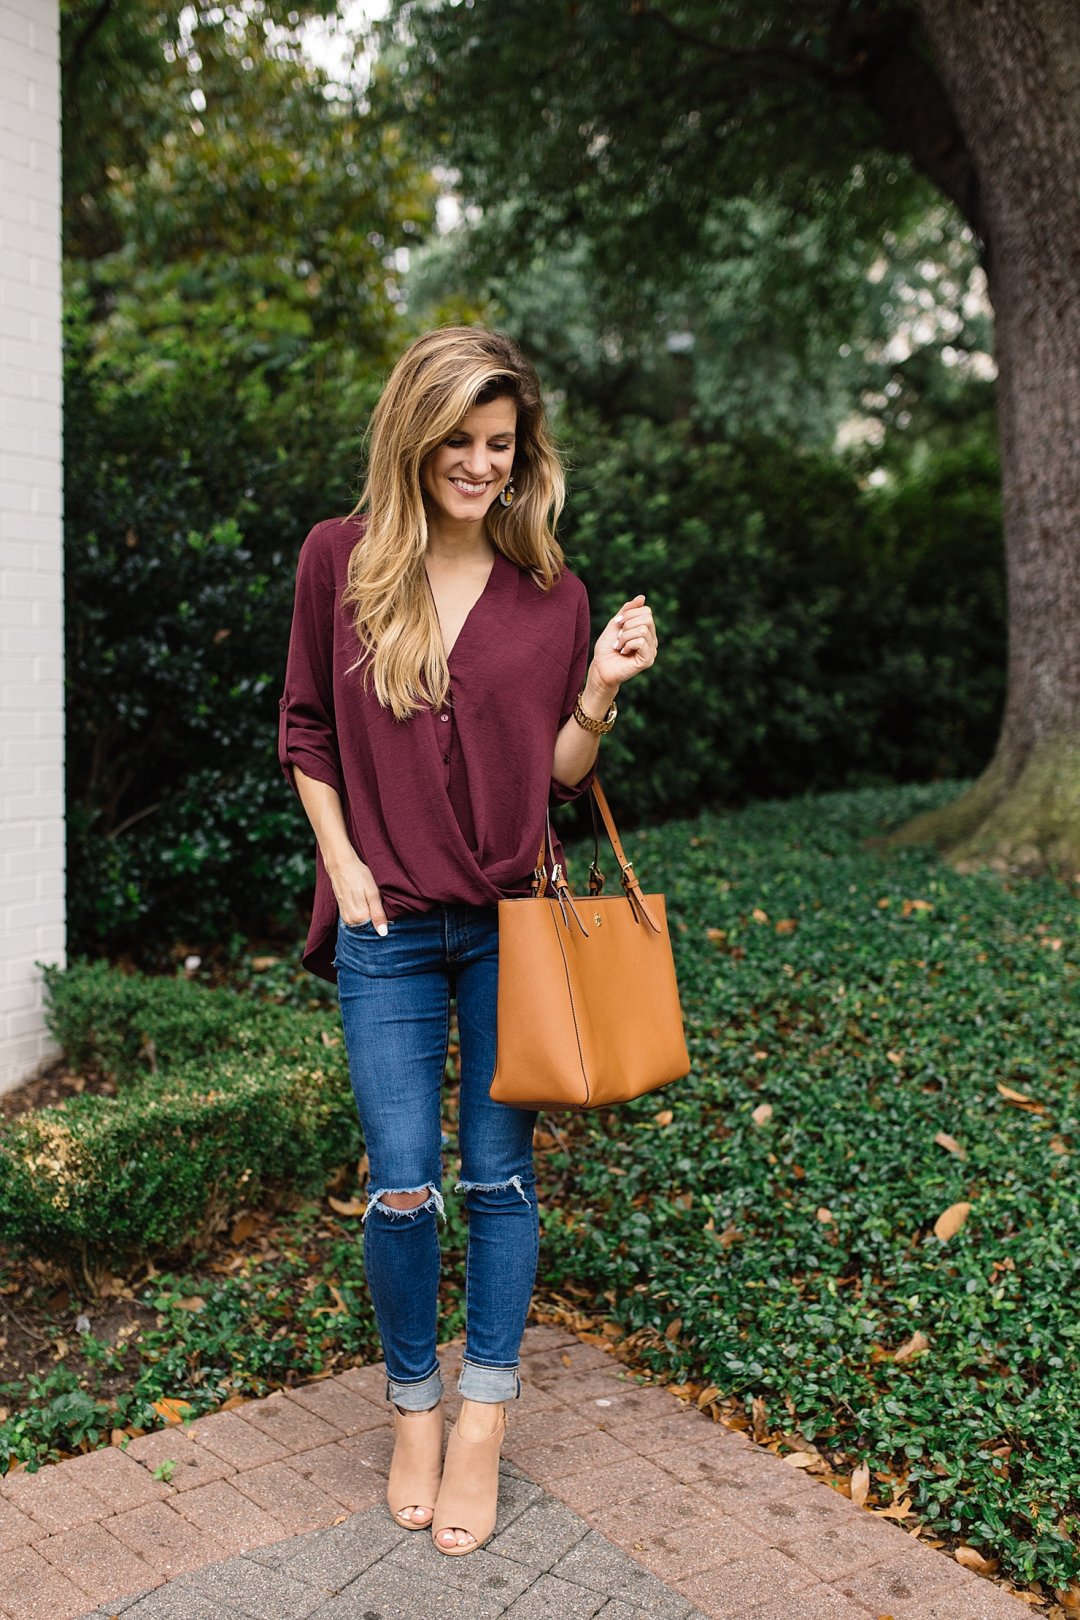 transitional summer to fall cute outfit idea with burgundy blouse, distressed denim and peep toe booties